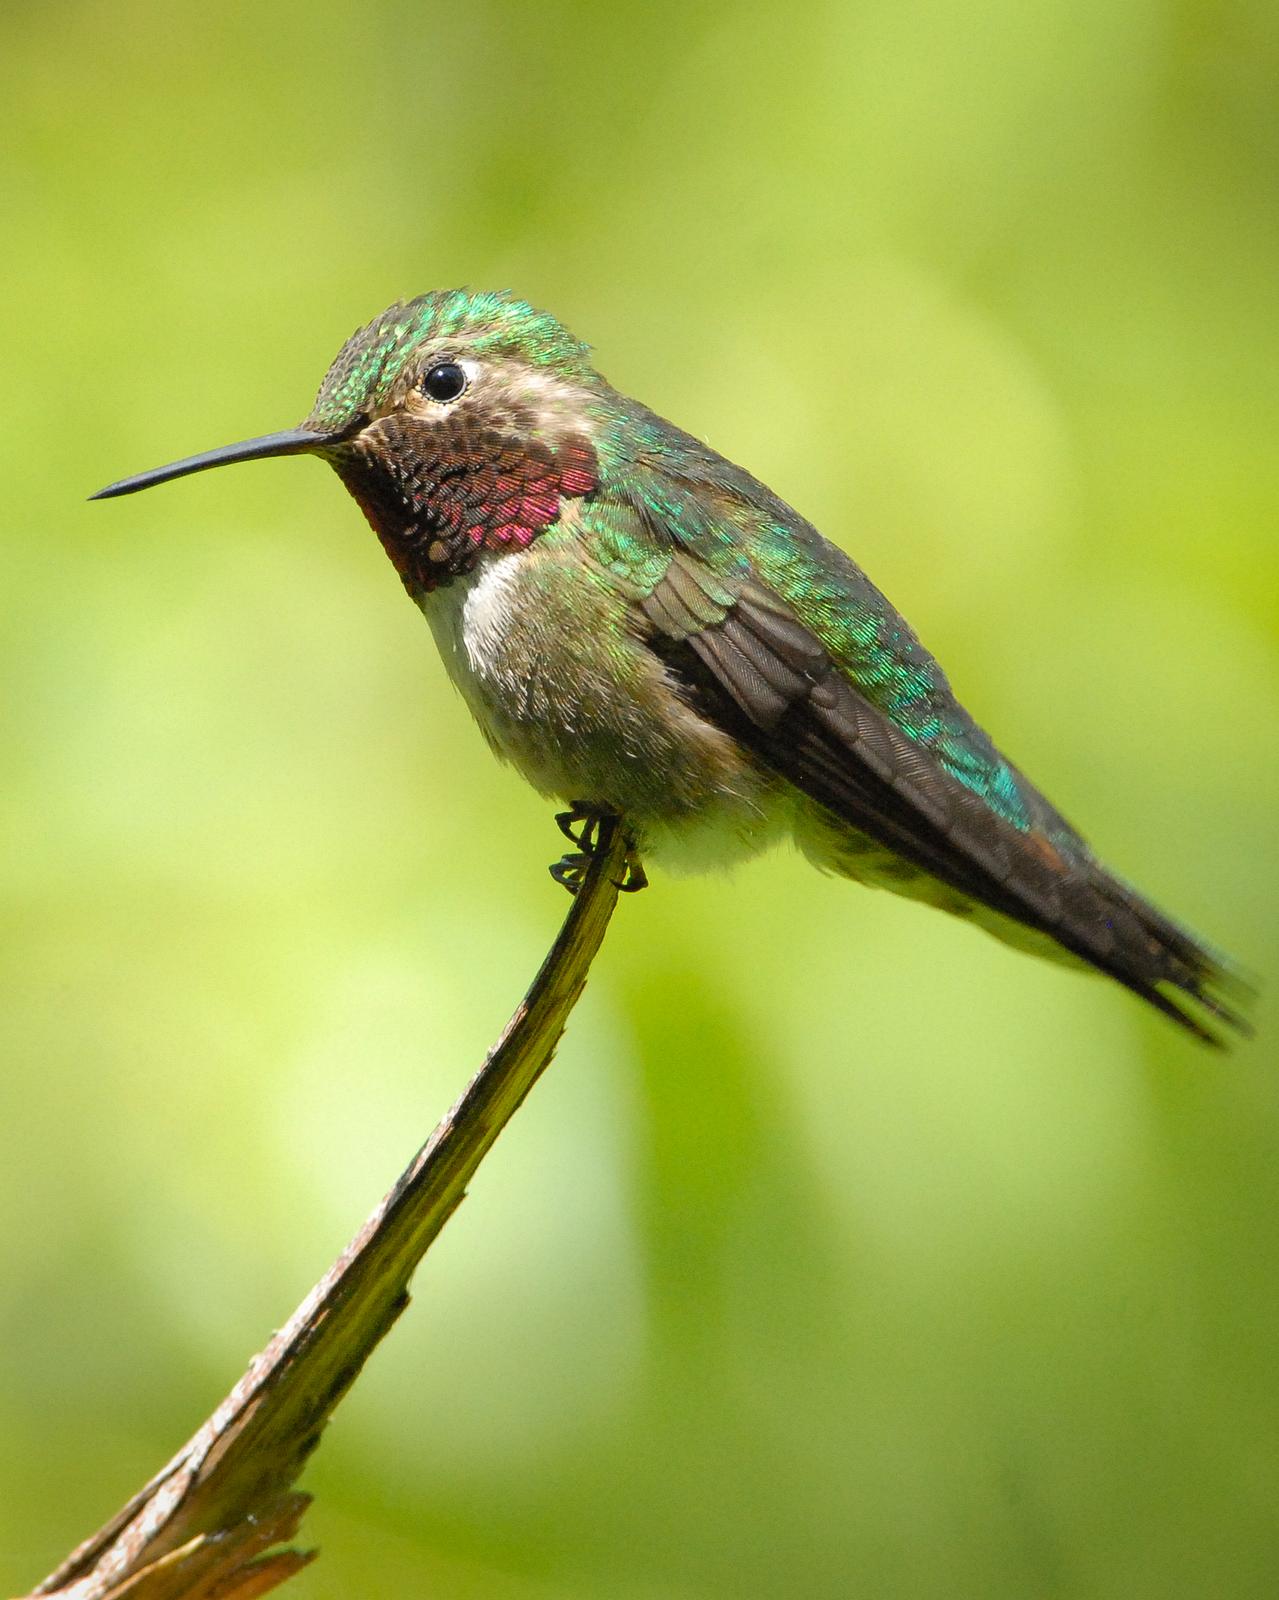 Broad-tailed Hummingbird Photo by Mike Fish